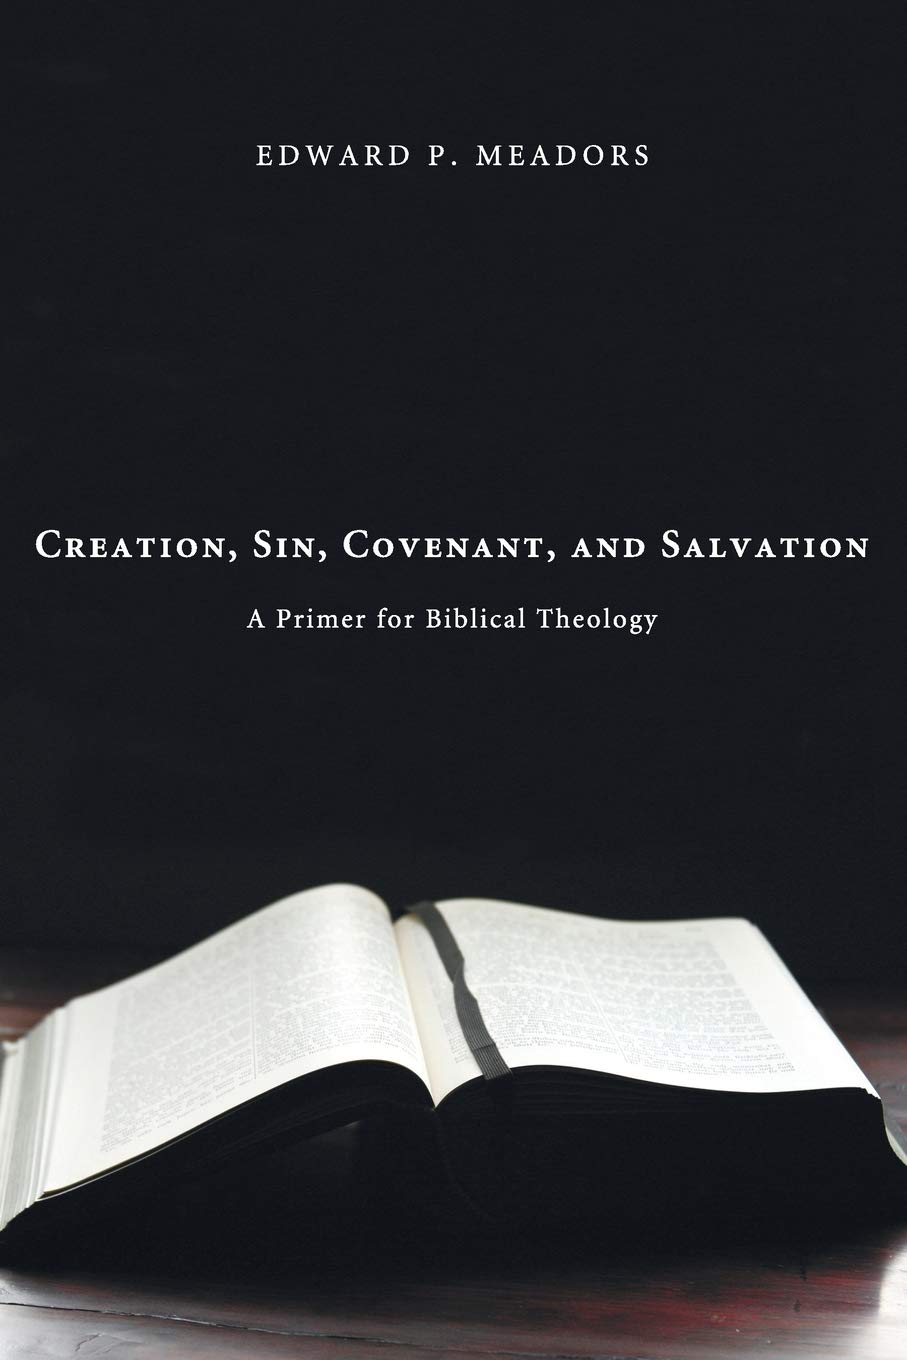 Creation, Sin, Covenant, and Salvation: A Primer for Biblical Theology